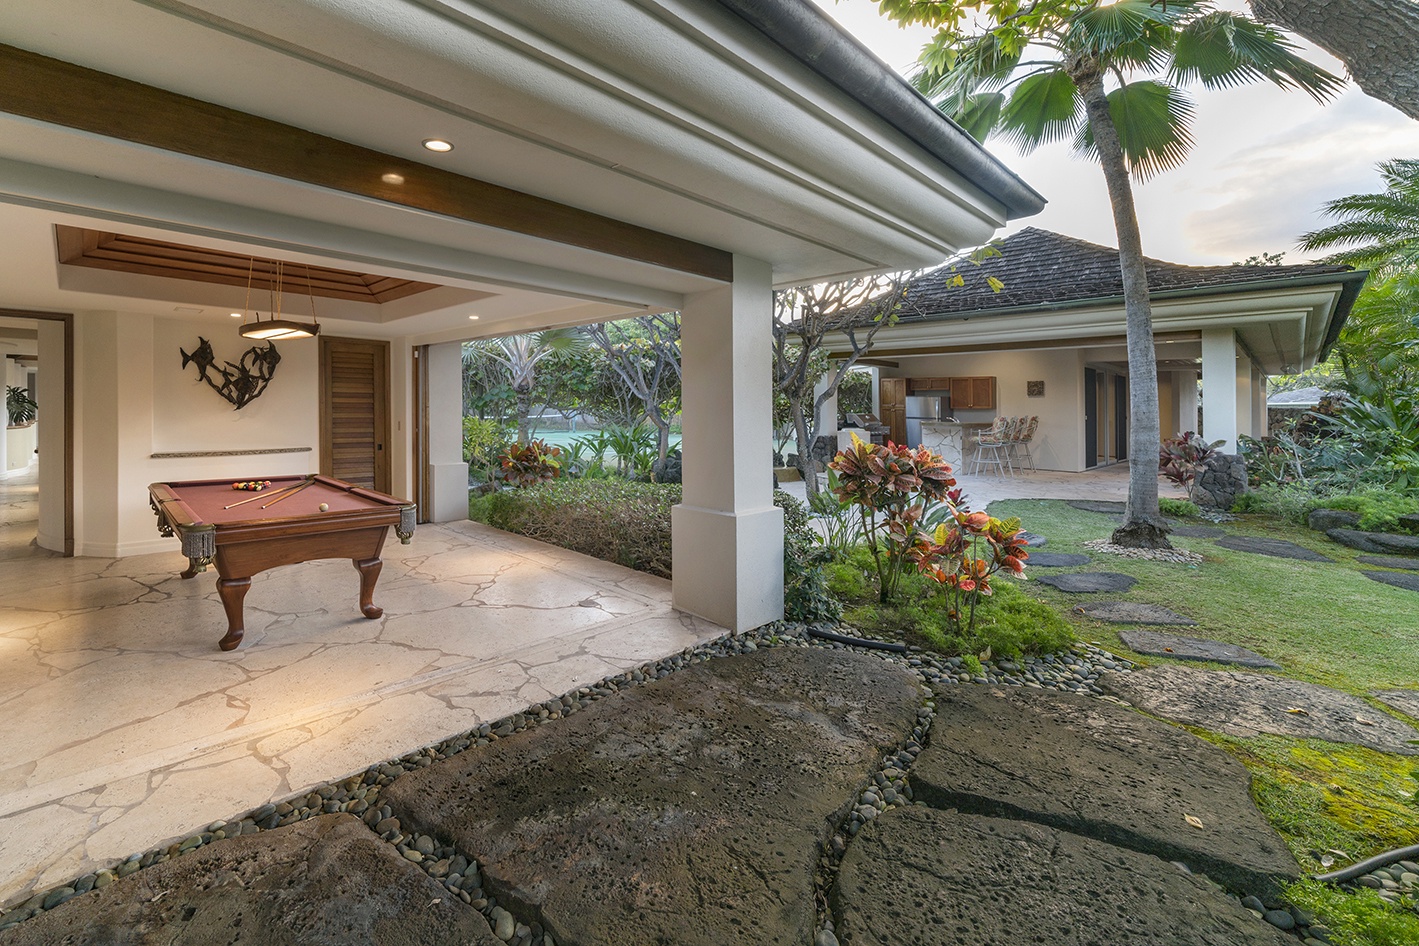 Kailua Vacation Rentals, Kailua's Kai Moena - Guest house: Billiard room opens to inside courtyard steps from the tennis court, fitness center, outside BBQ, pool and spa.